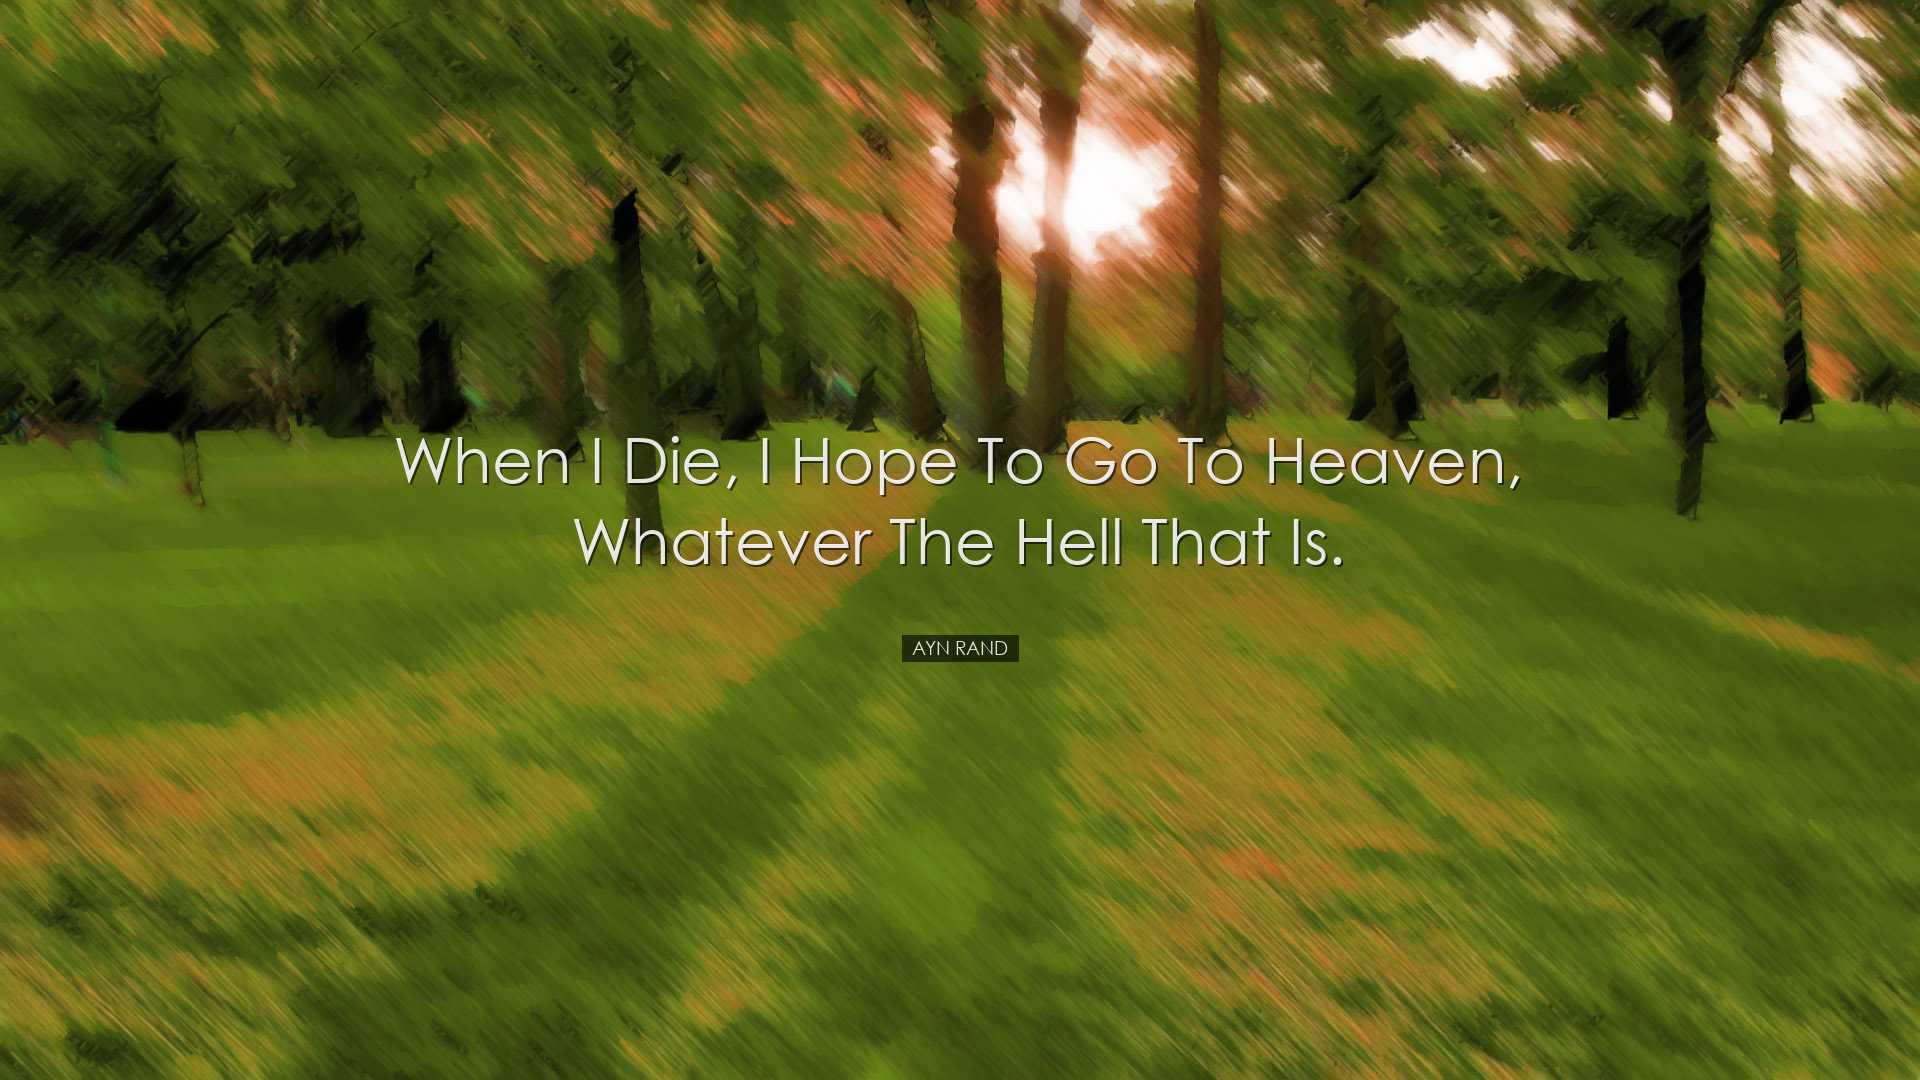 When I die, I hope to go to Heaven, whatever the Hell that is. - A